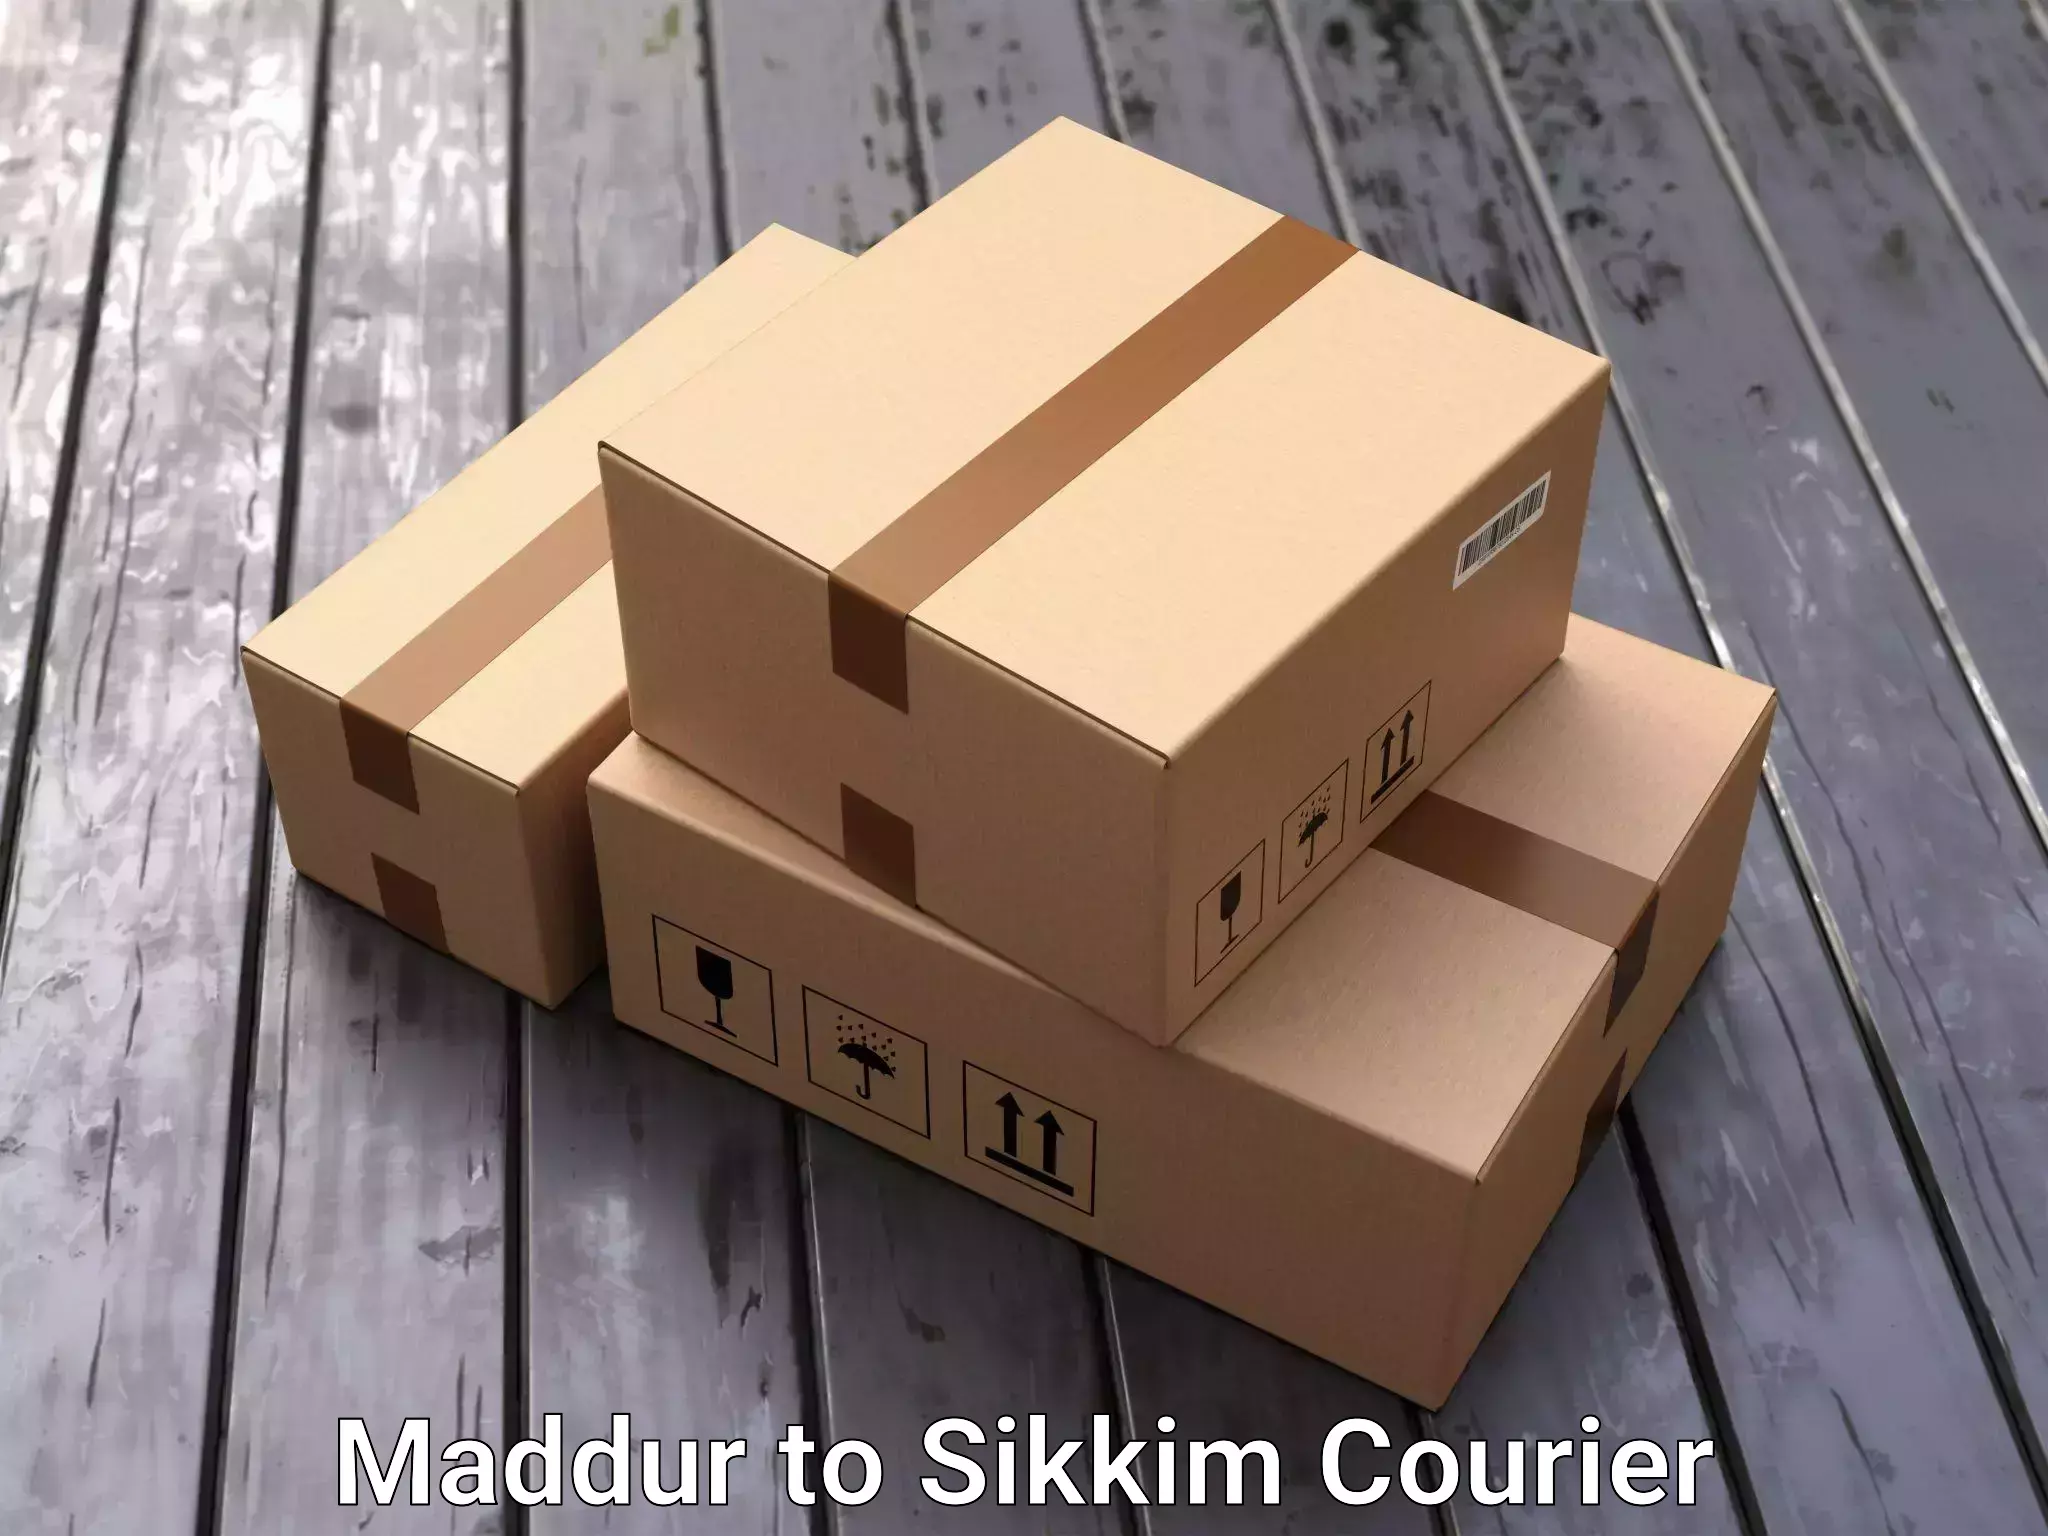 Professional movers Maddur to Sikkim